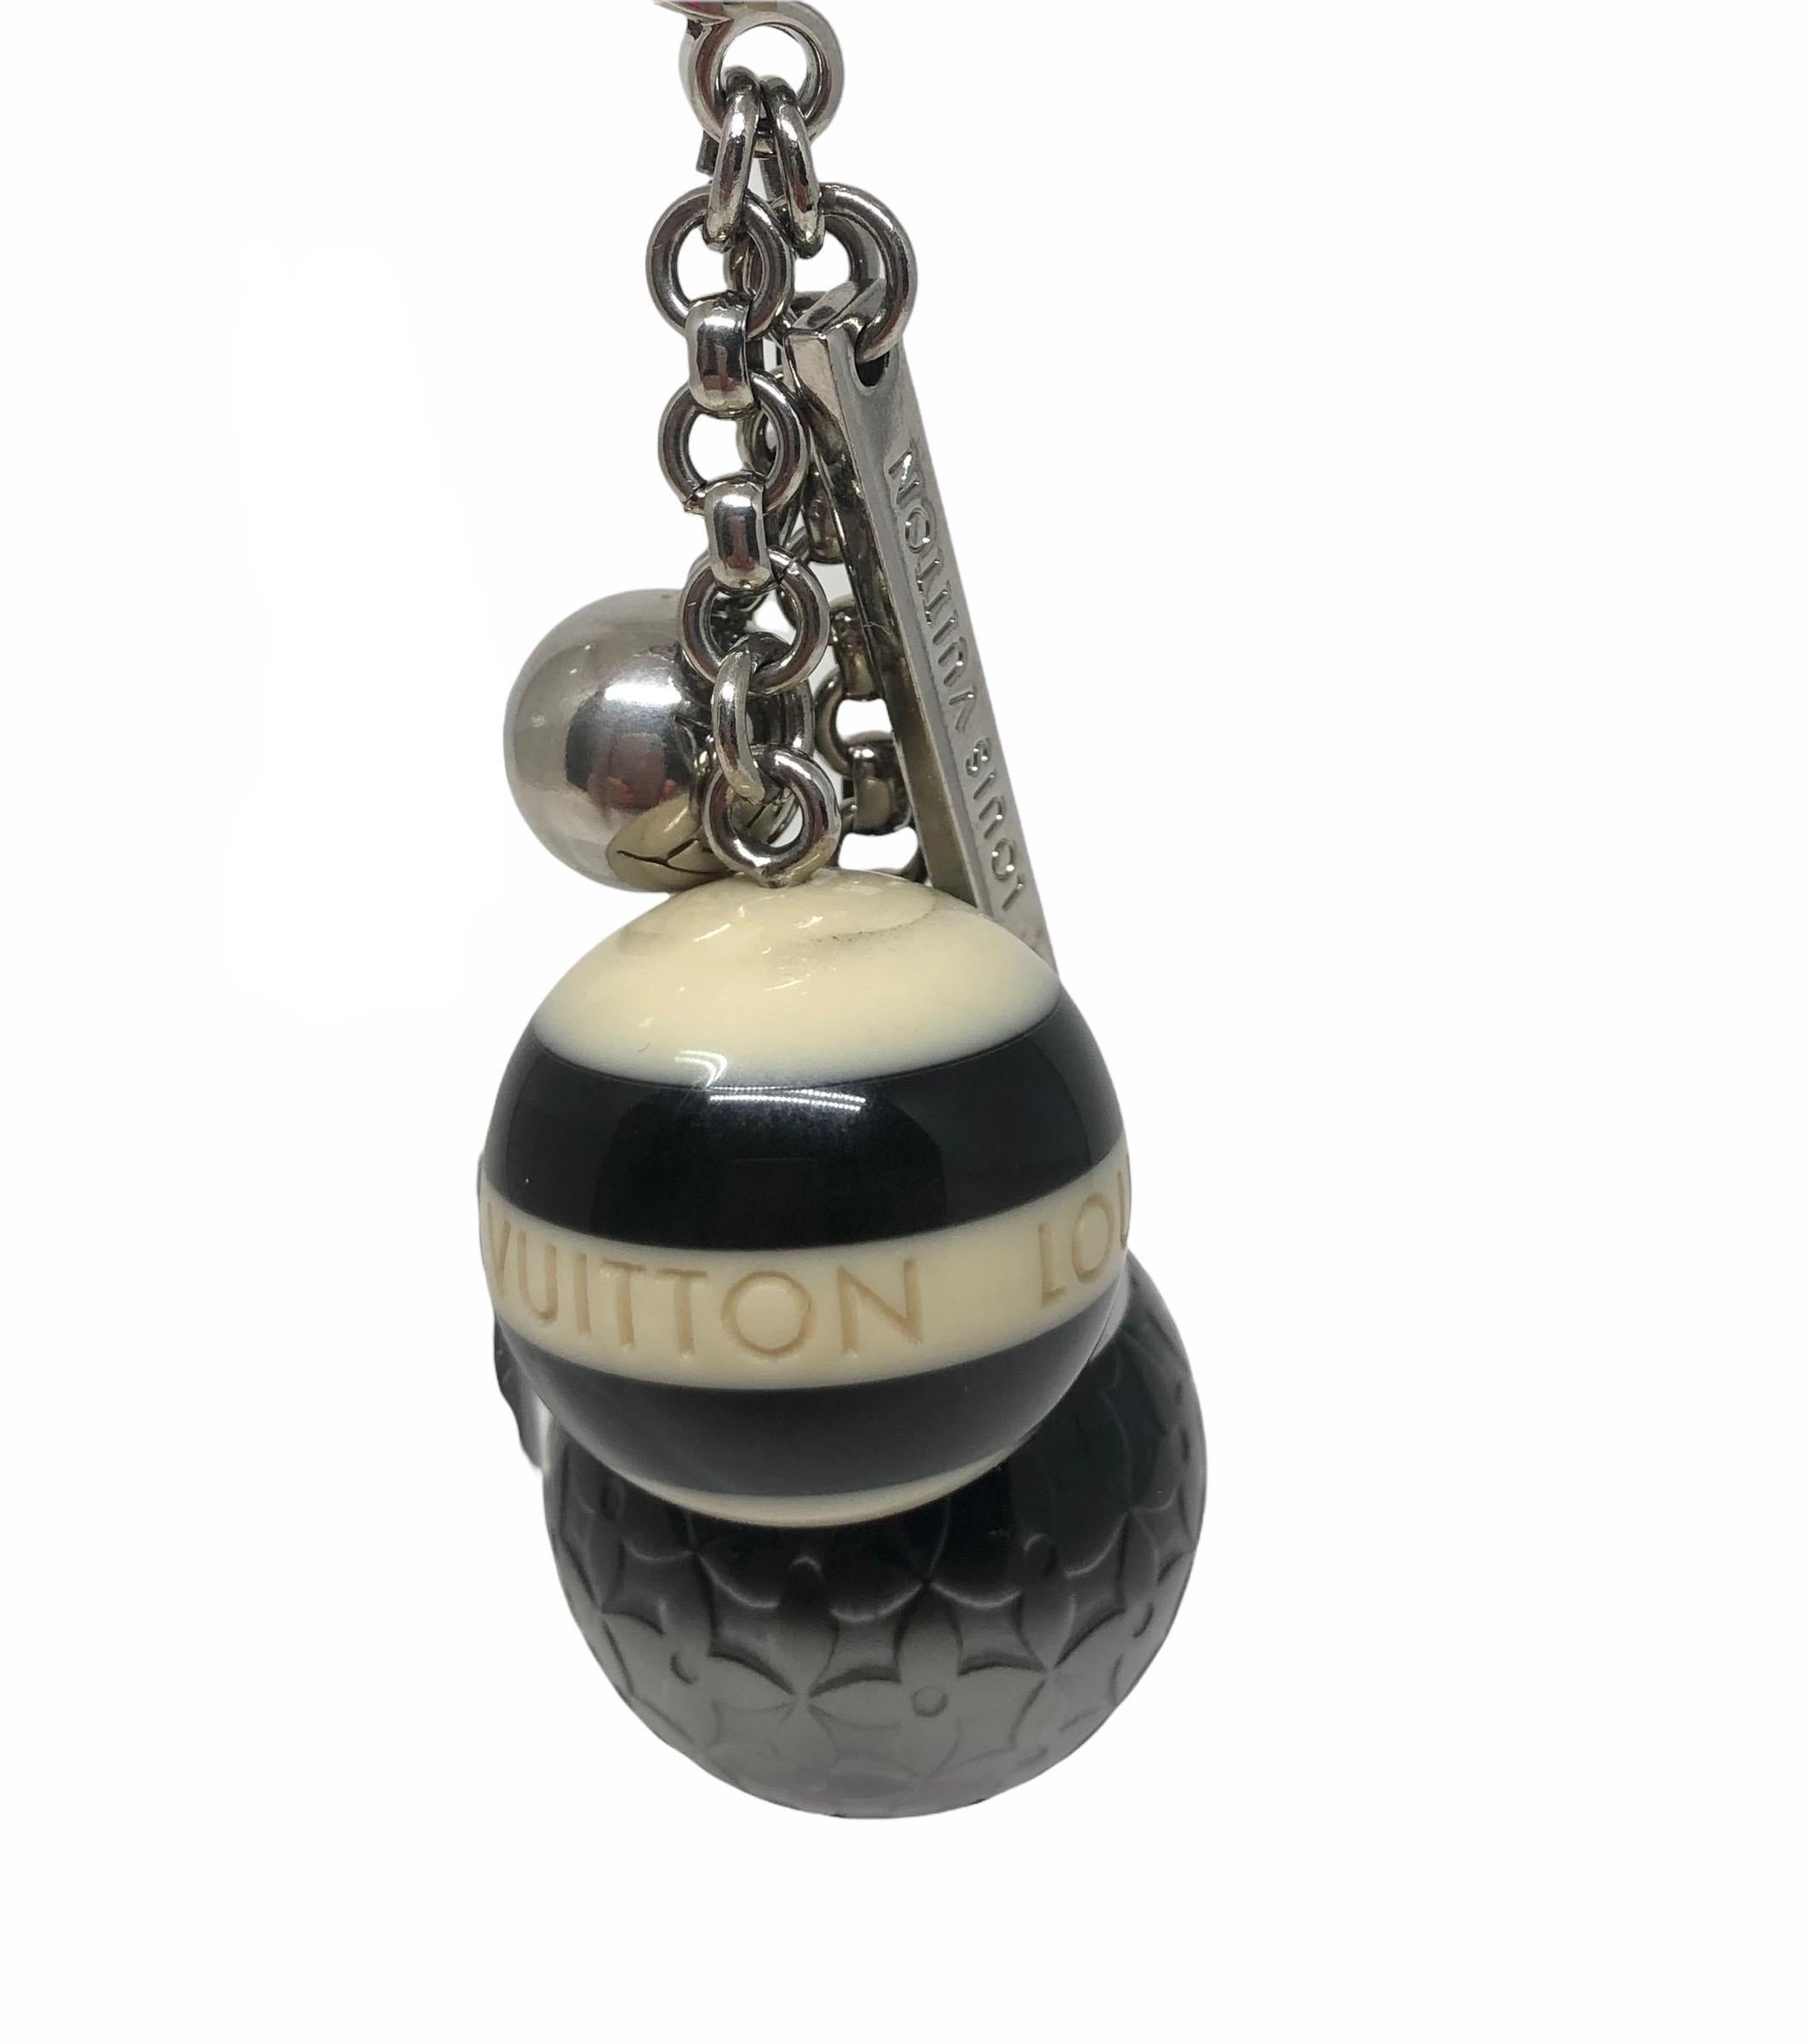 This cute charm and key  features two colored ball charms, a bigger pink ball with monogram flower print and a smaller pink one with stripes and Louis Vuitton signature. It also has one small golden ball charm with LV engraving and a thin metal